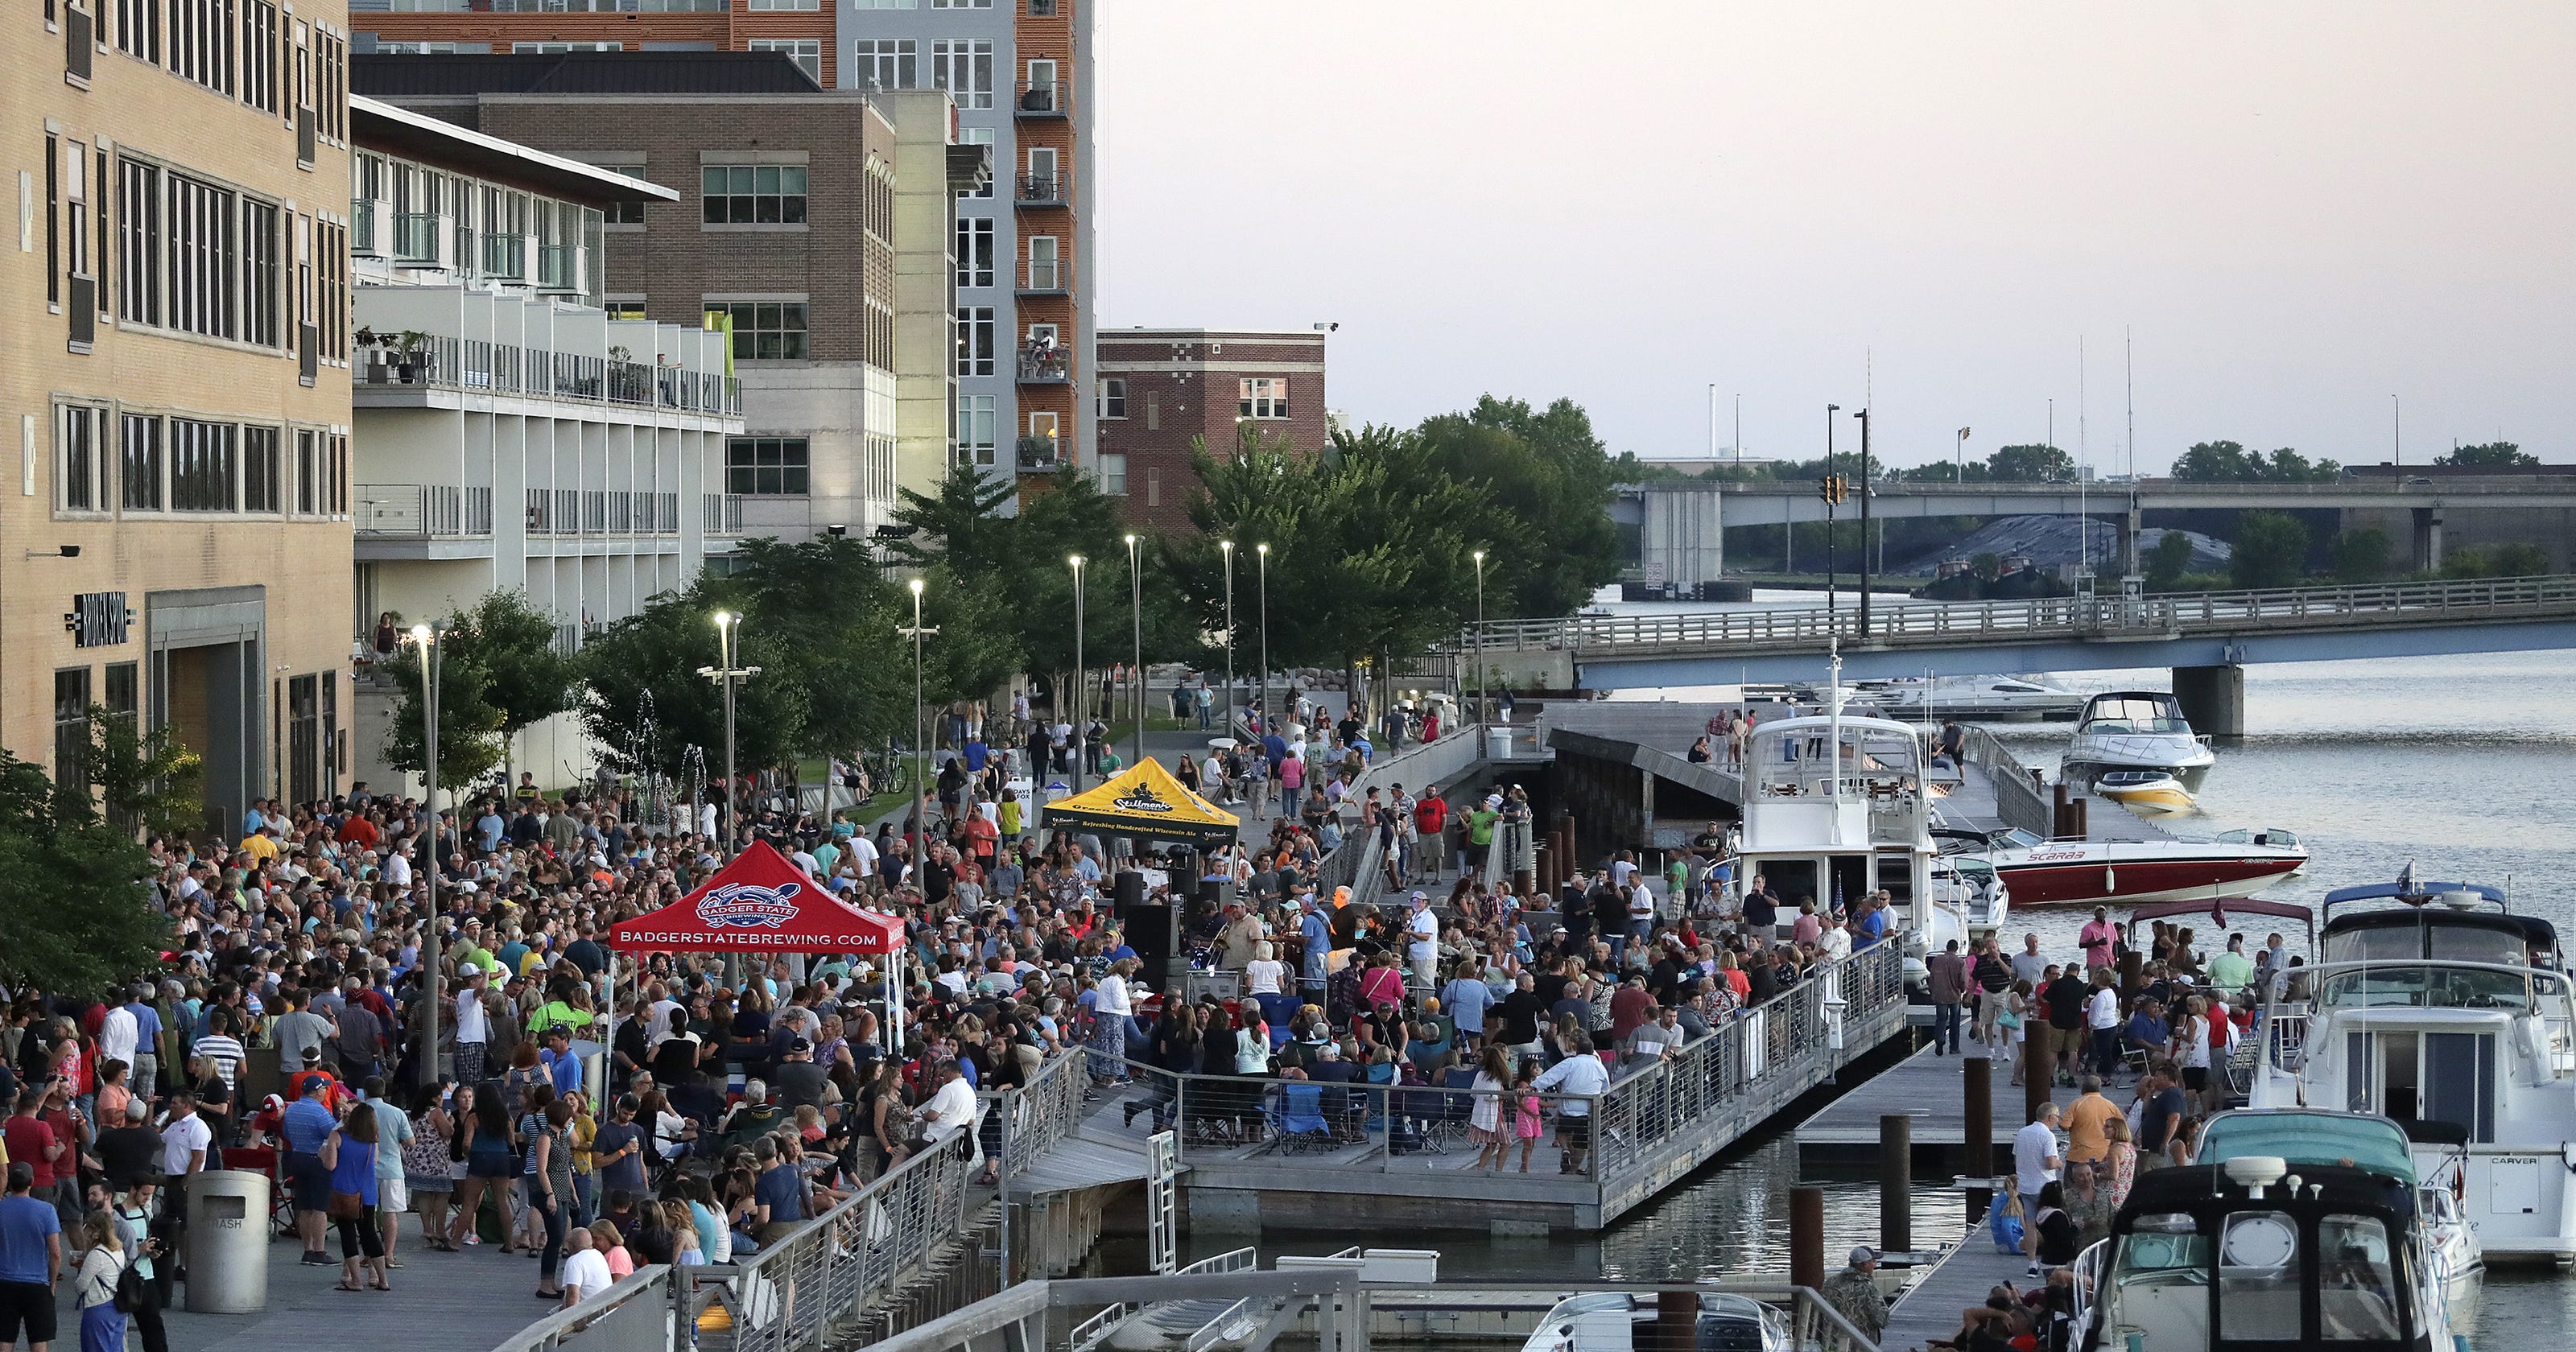 Rock the Dock music fest bringing 3 stages of bands to CityDeck in July